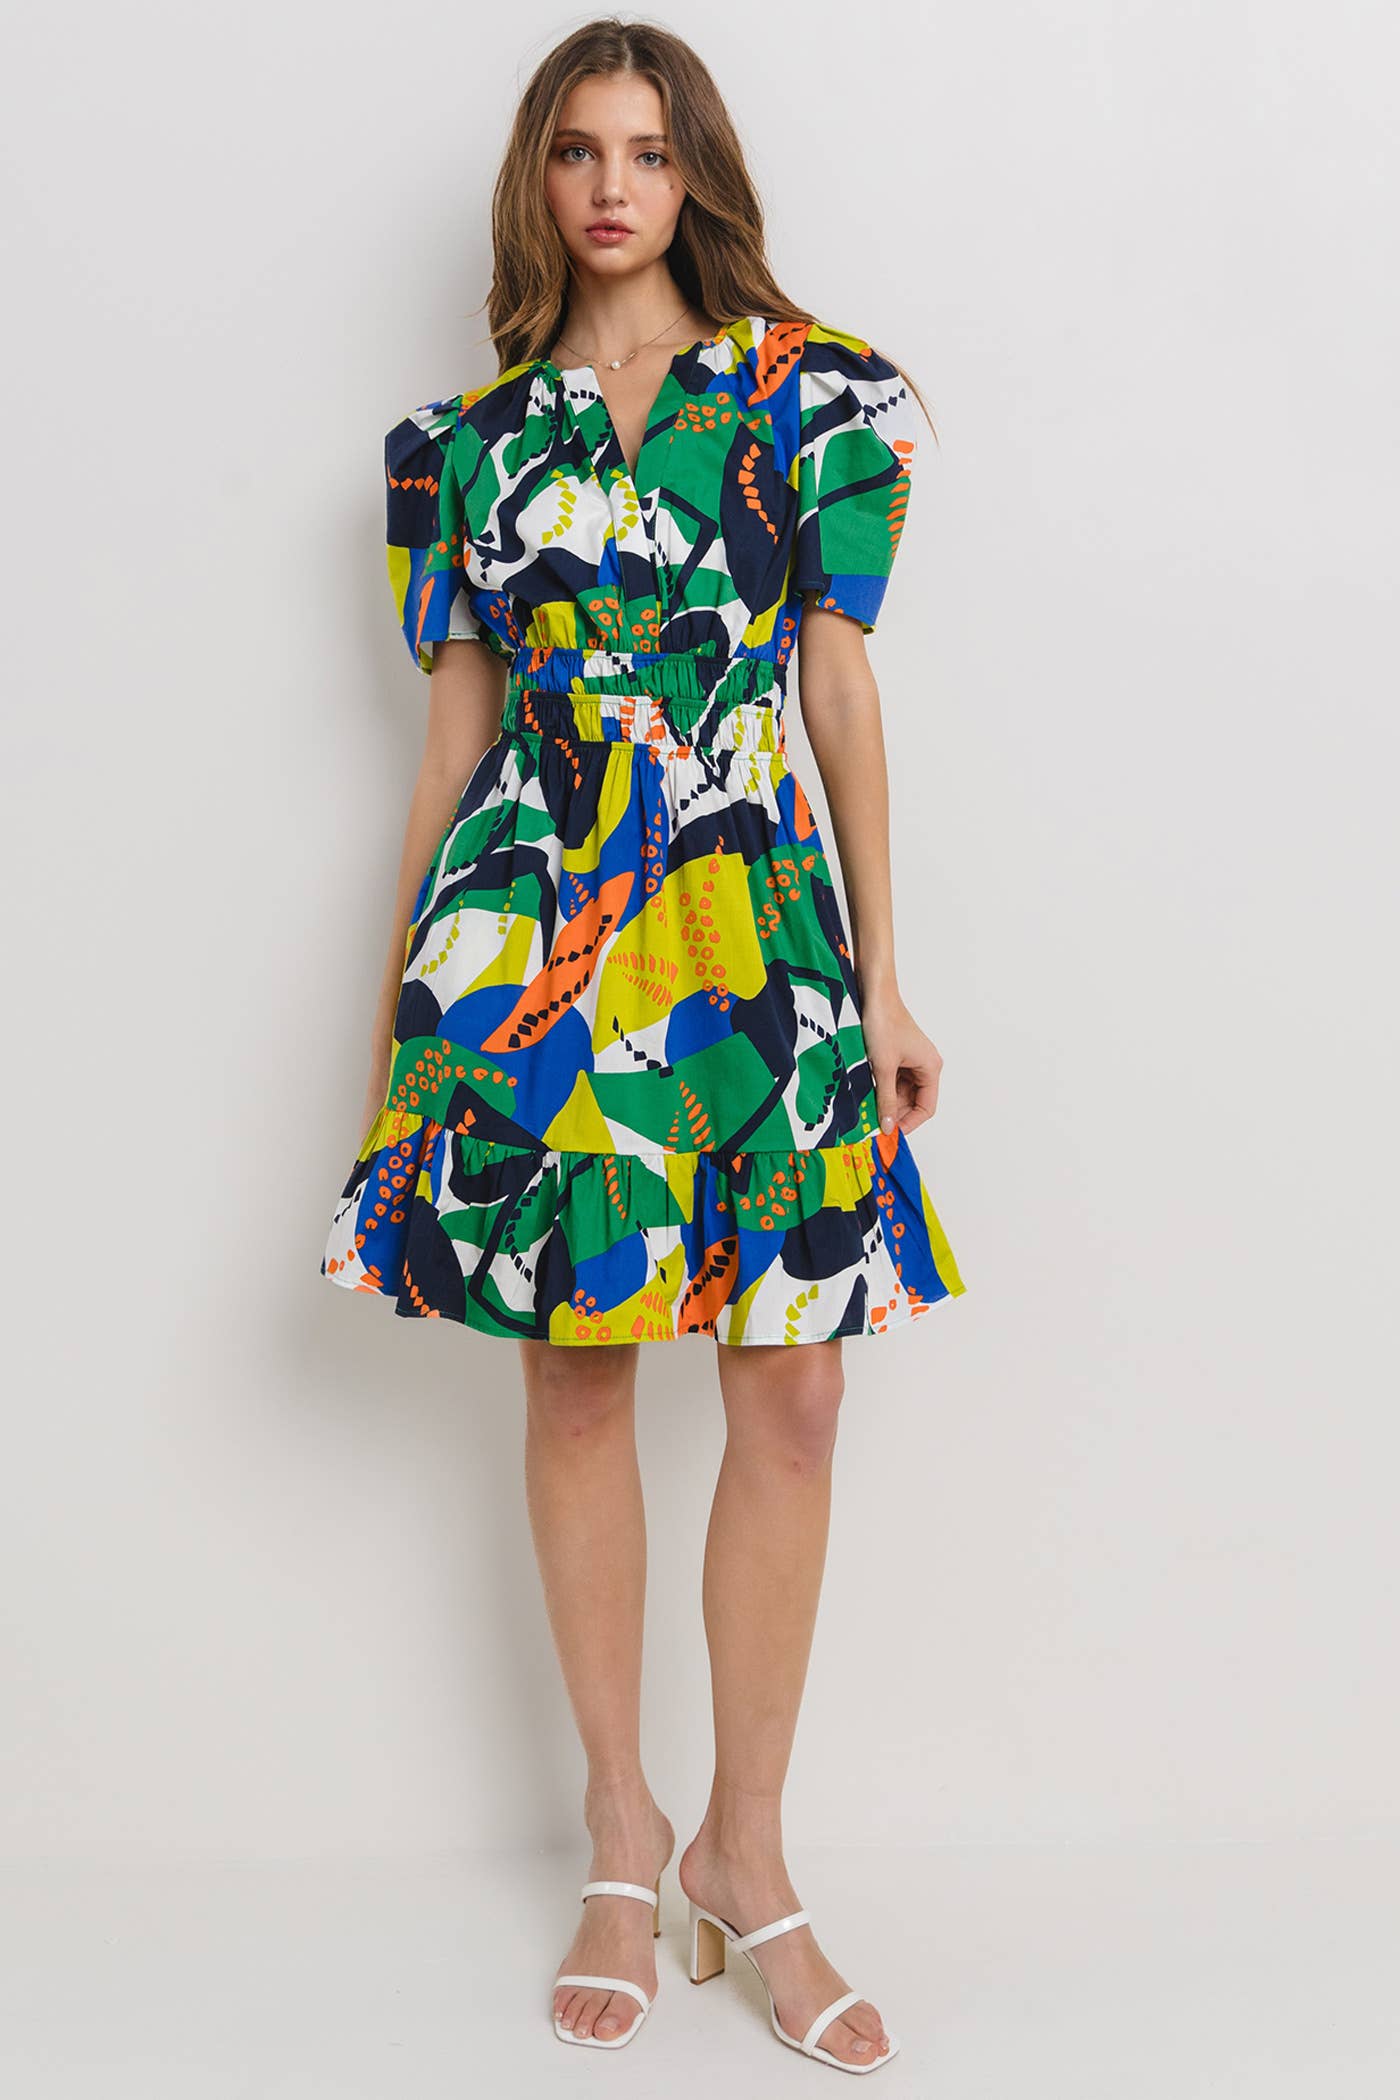 model is wearing a tropical printed dress with puffy sleeves